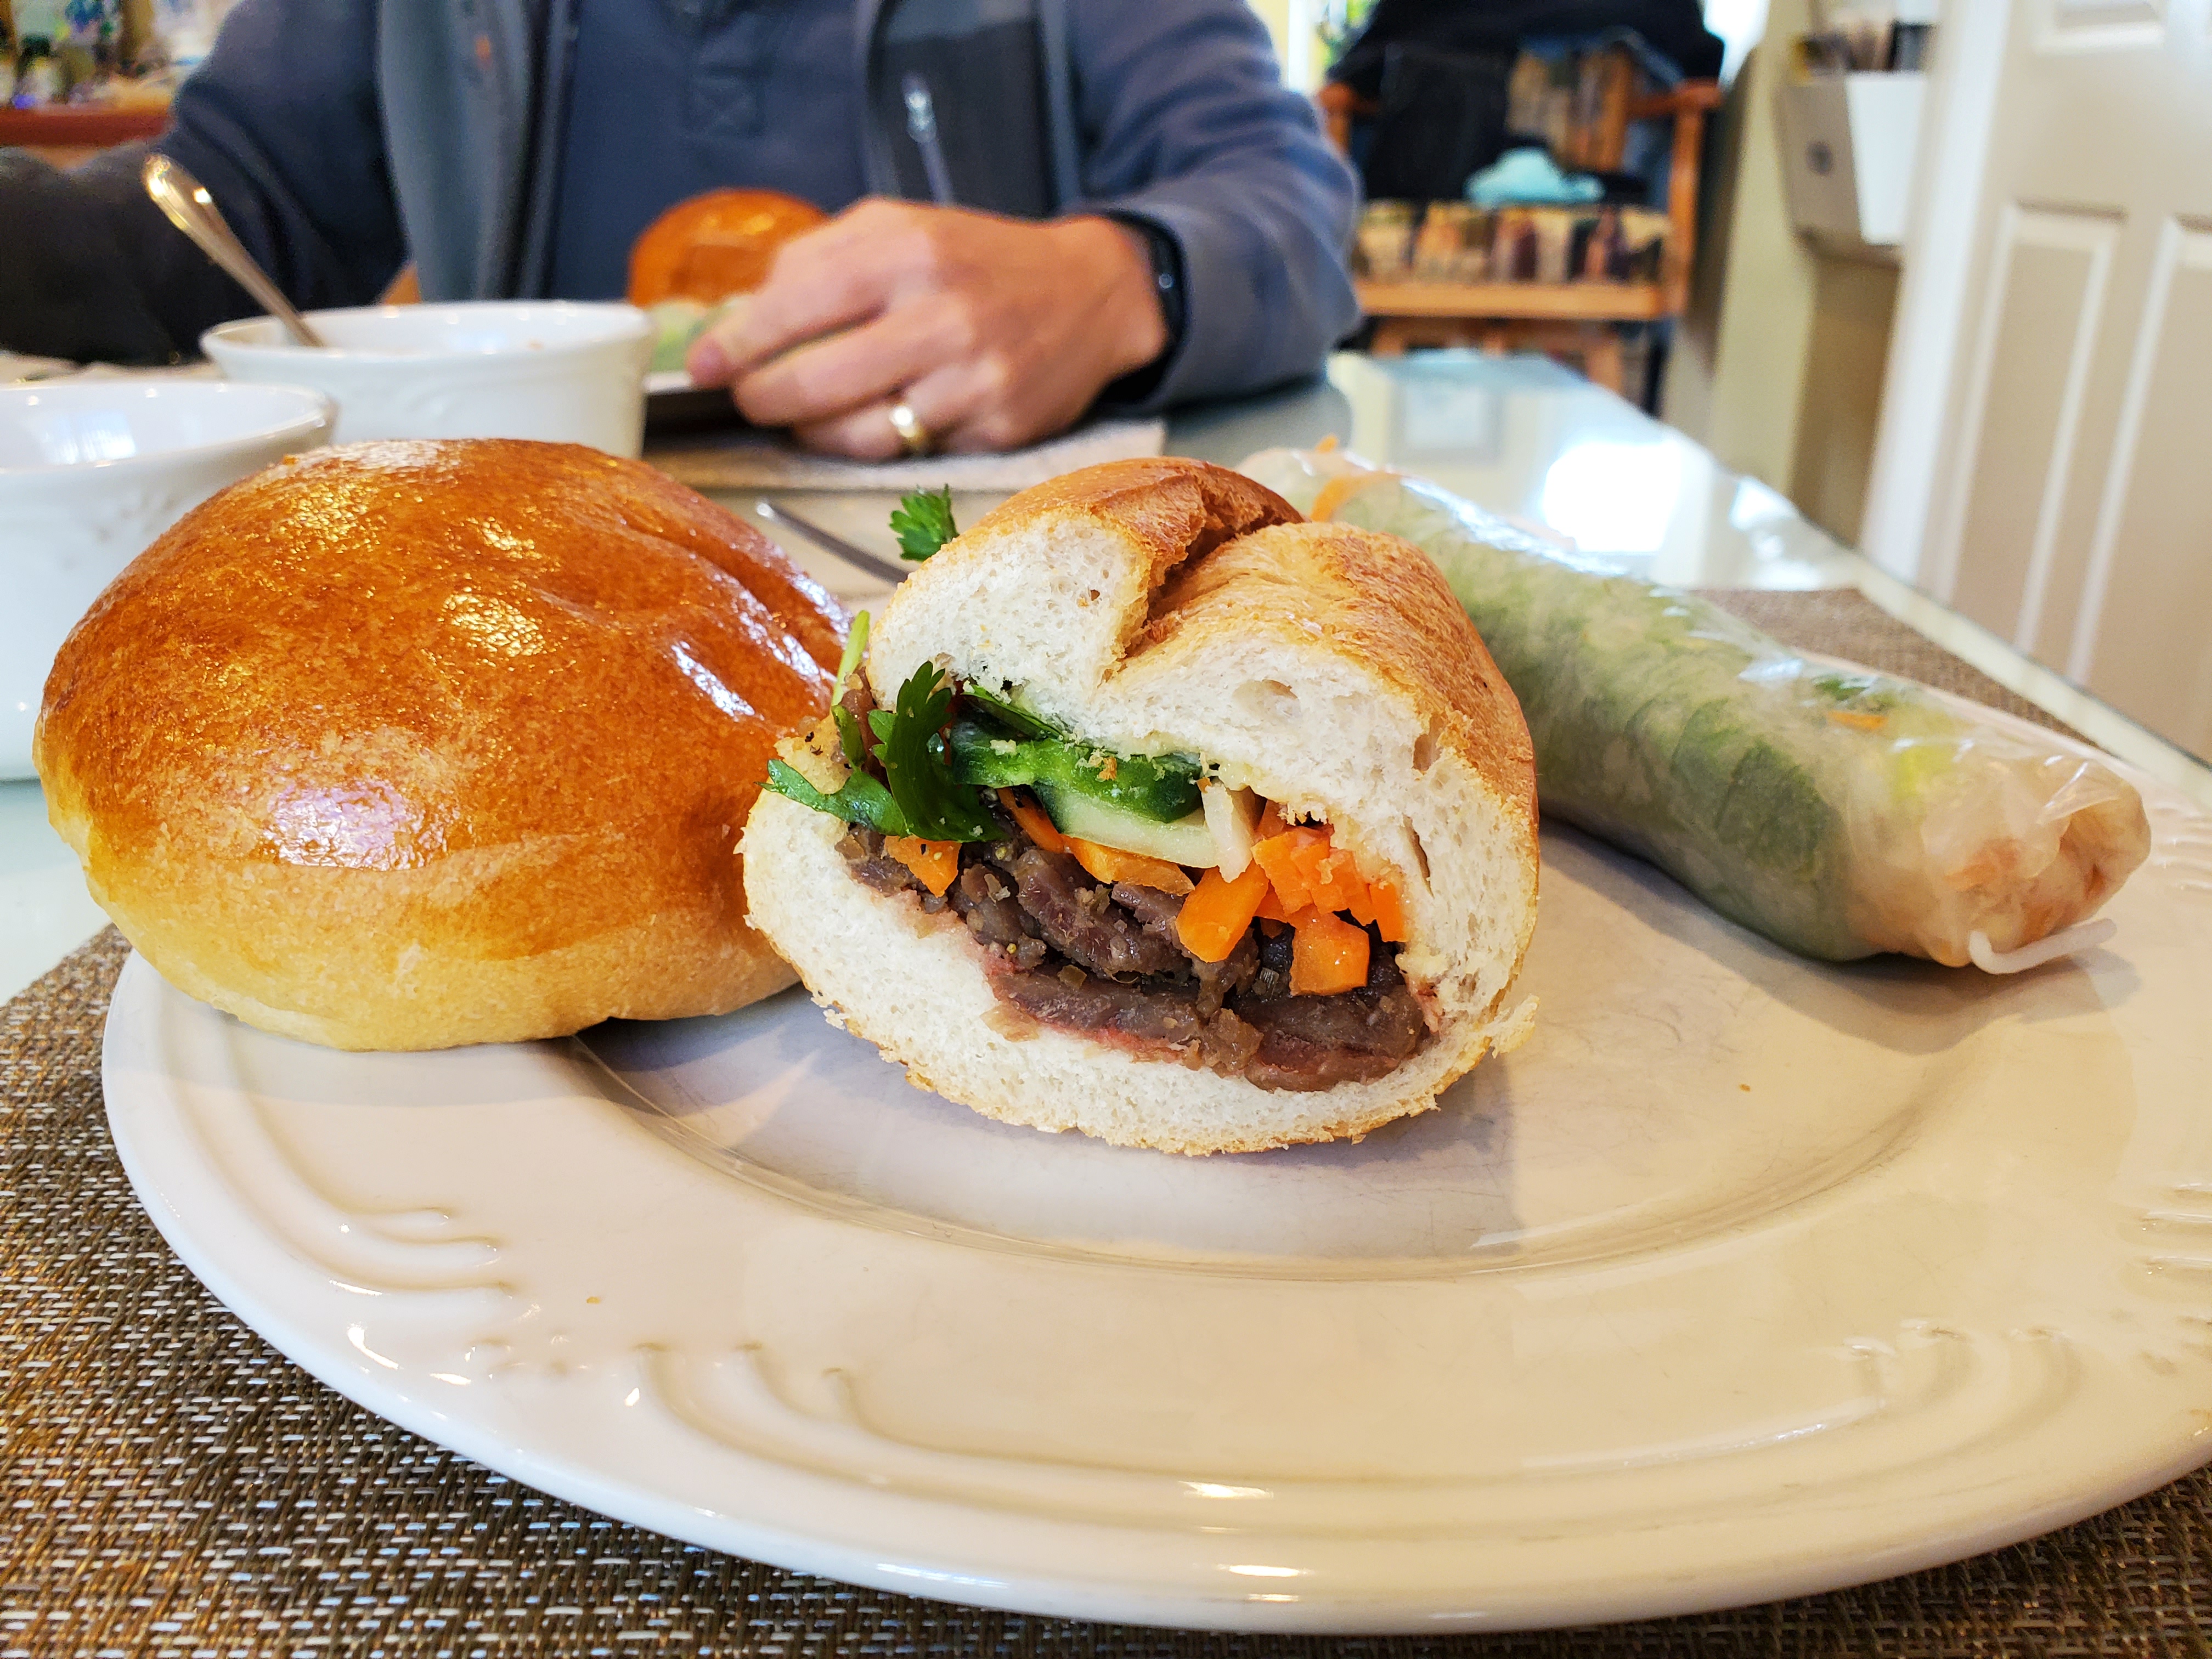 From left to right, Chinese bbq pork bun from Keefer Court, Banh mi sandwich and spring roll from My Huong.